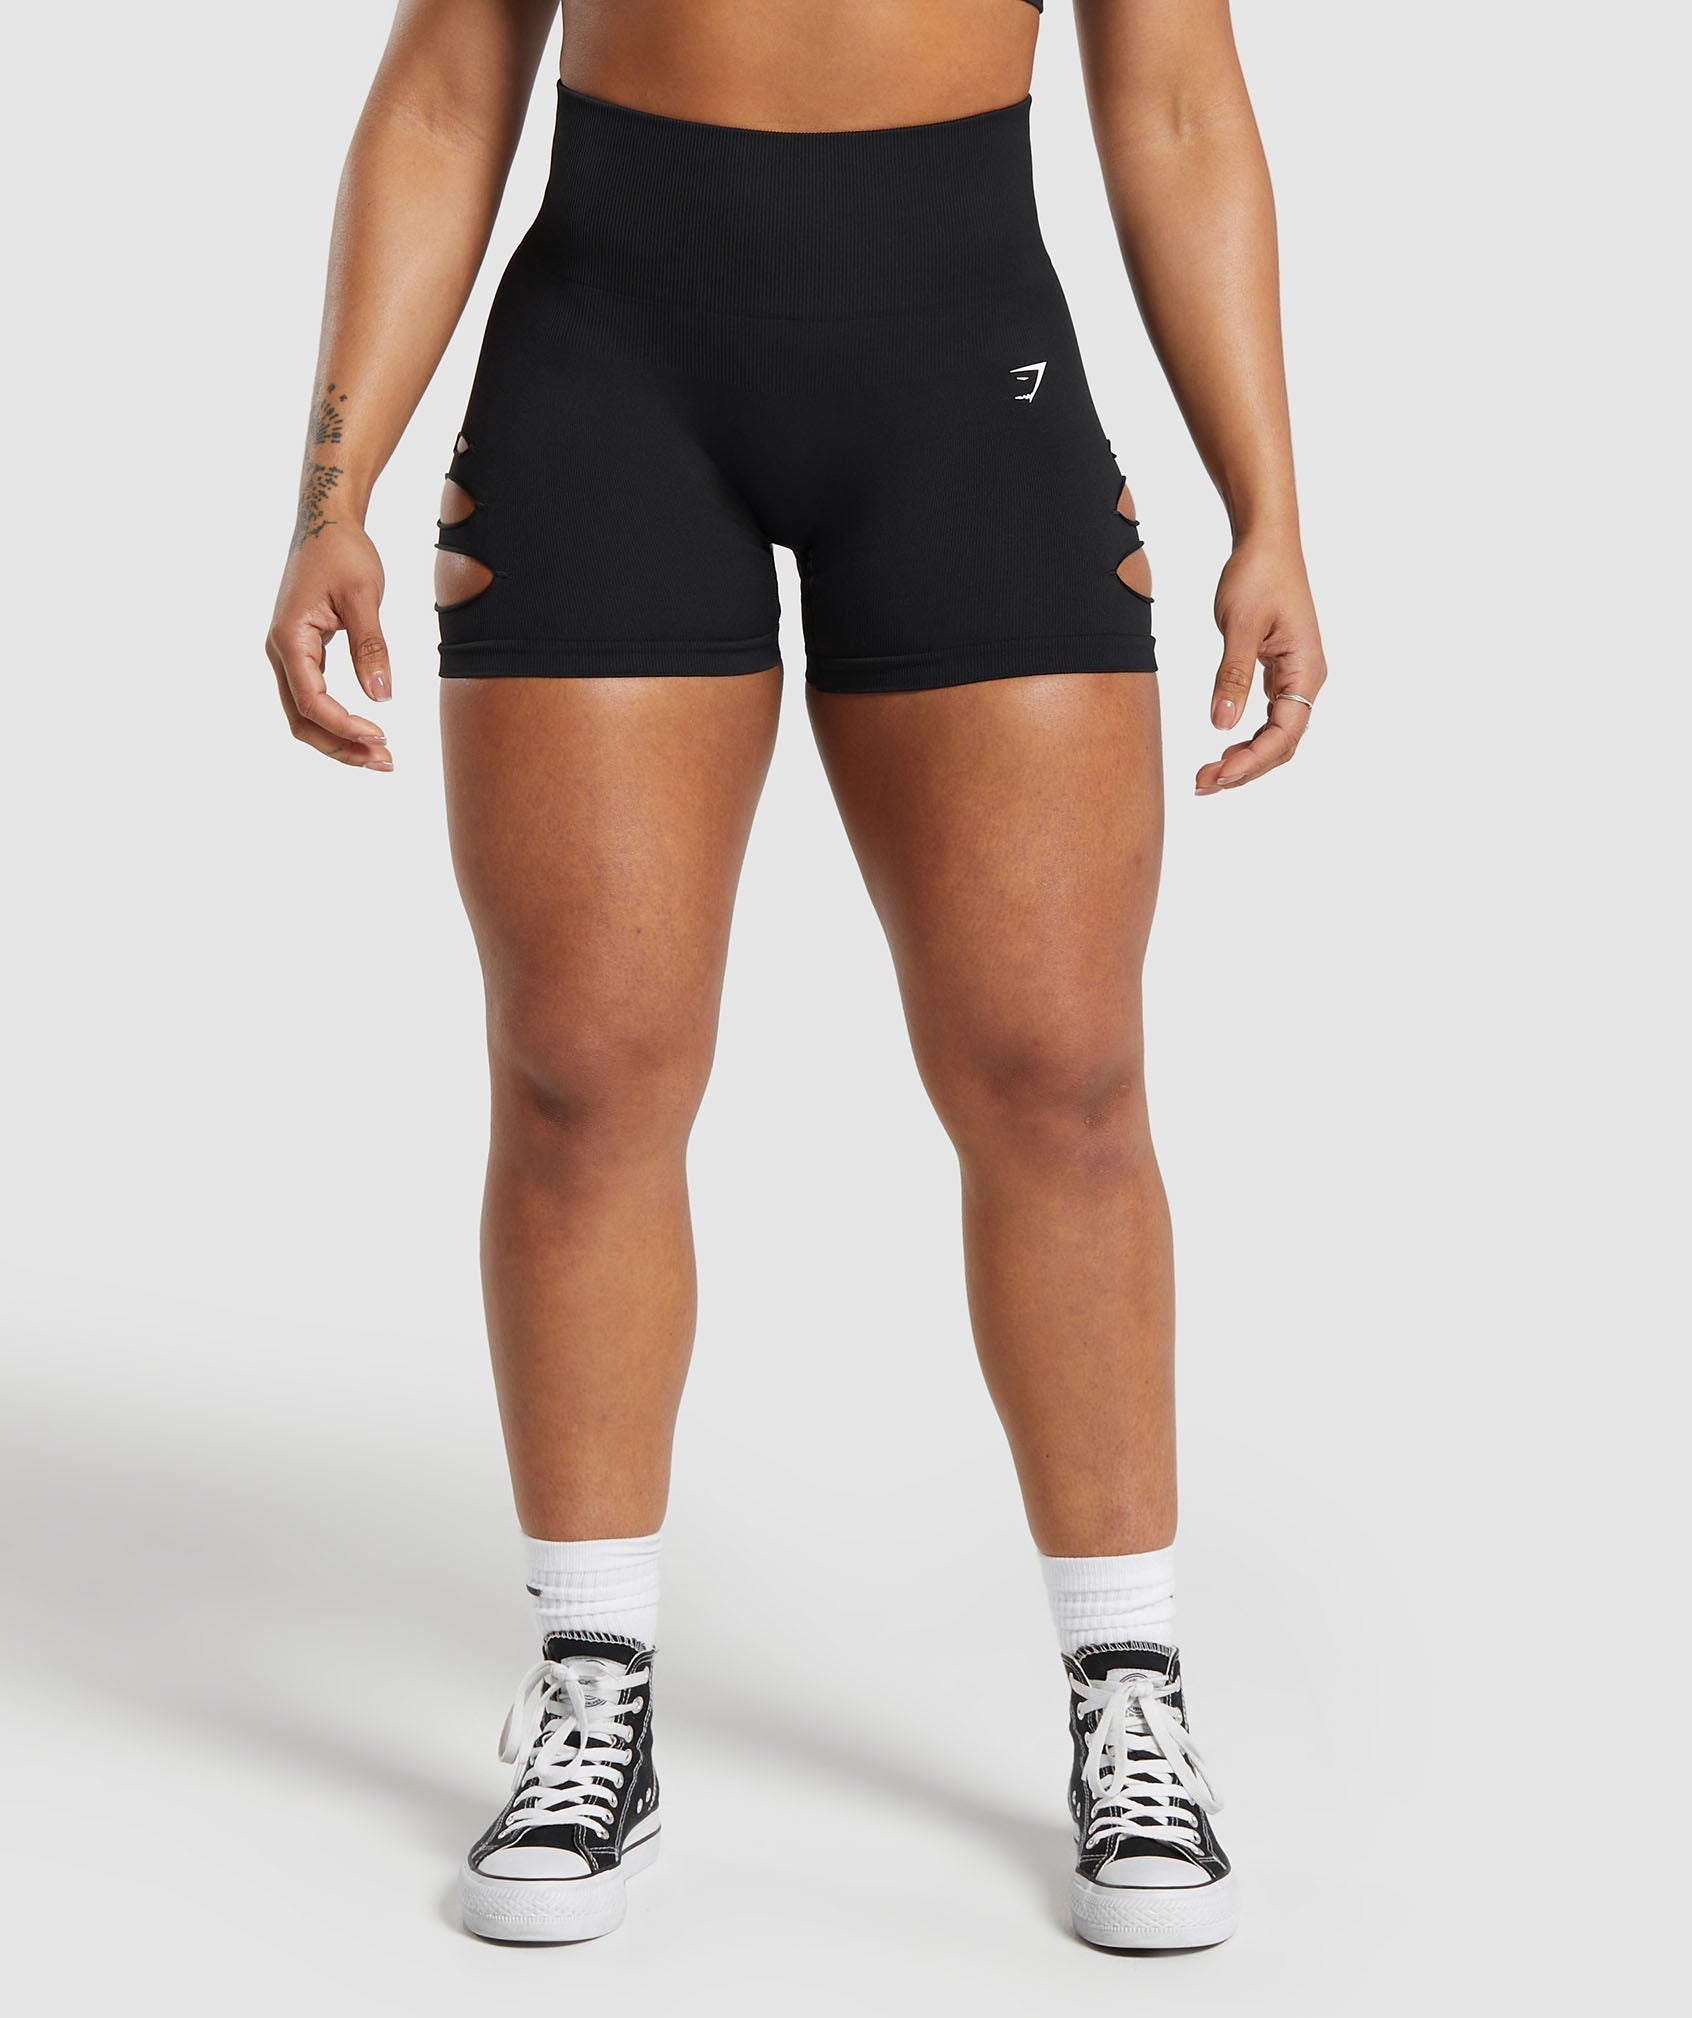 Gains Seamless Ripped Shorts in Black - view 3